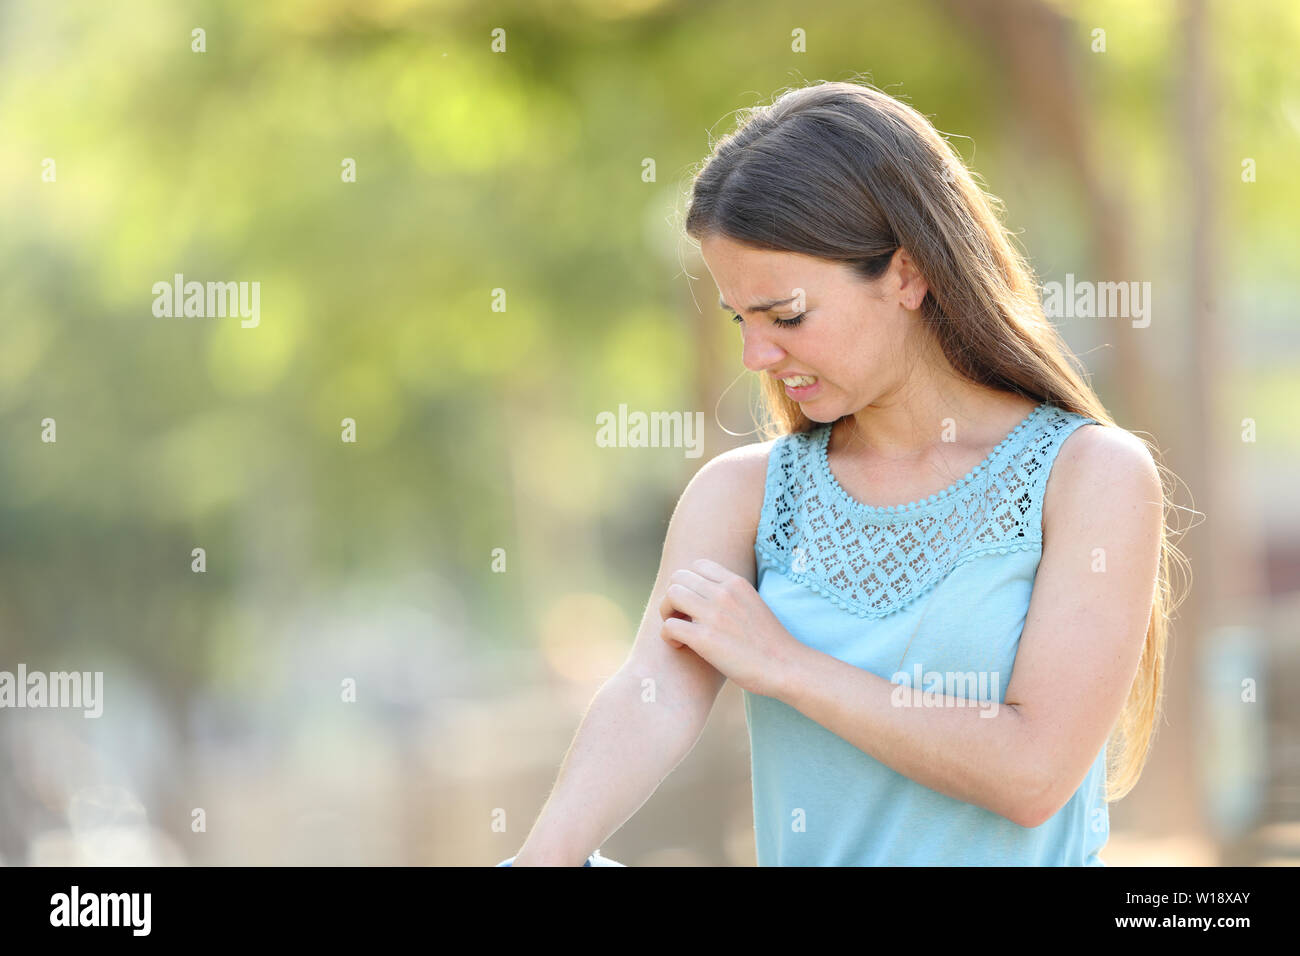 Woman scratching arm because it stings in a park with a green background Stock Photo